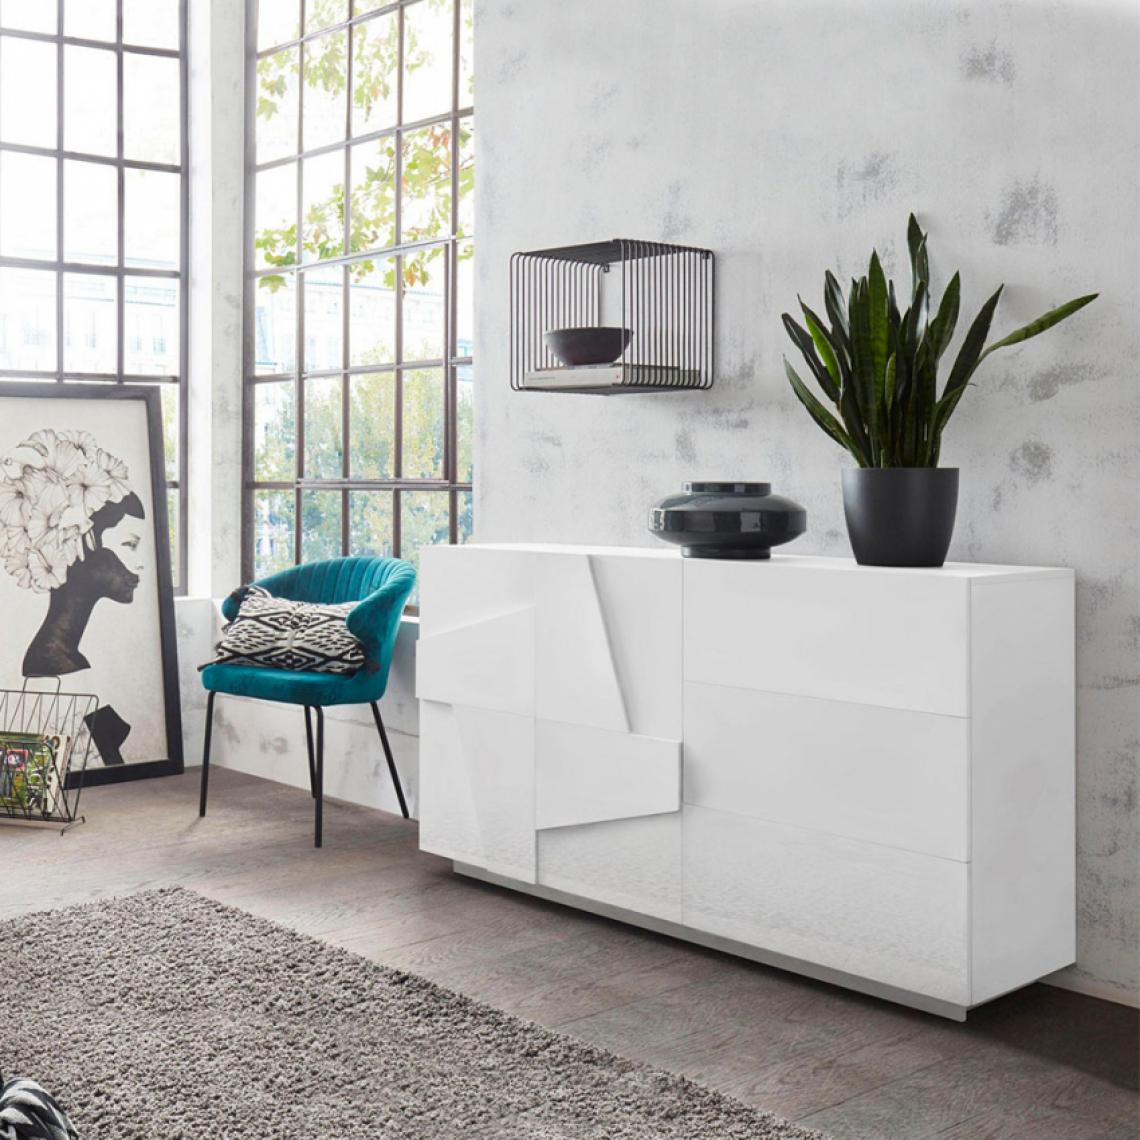 Ahd Amazing Home Design - Buffet commode 2 portes 3 tiroirs coulissants moderne blanc Ping Side M - Fond de hotte